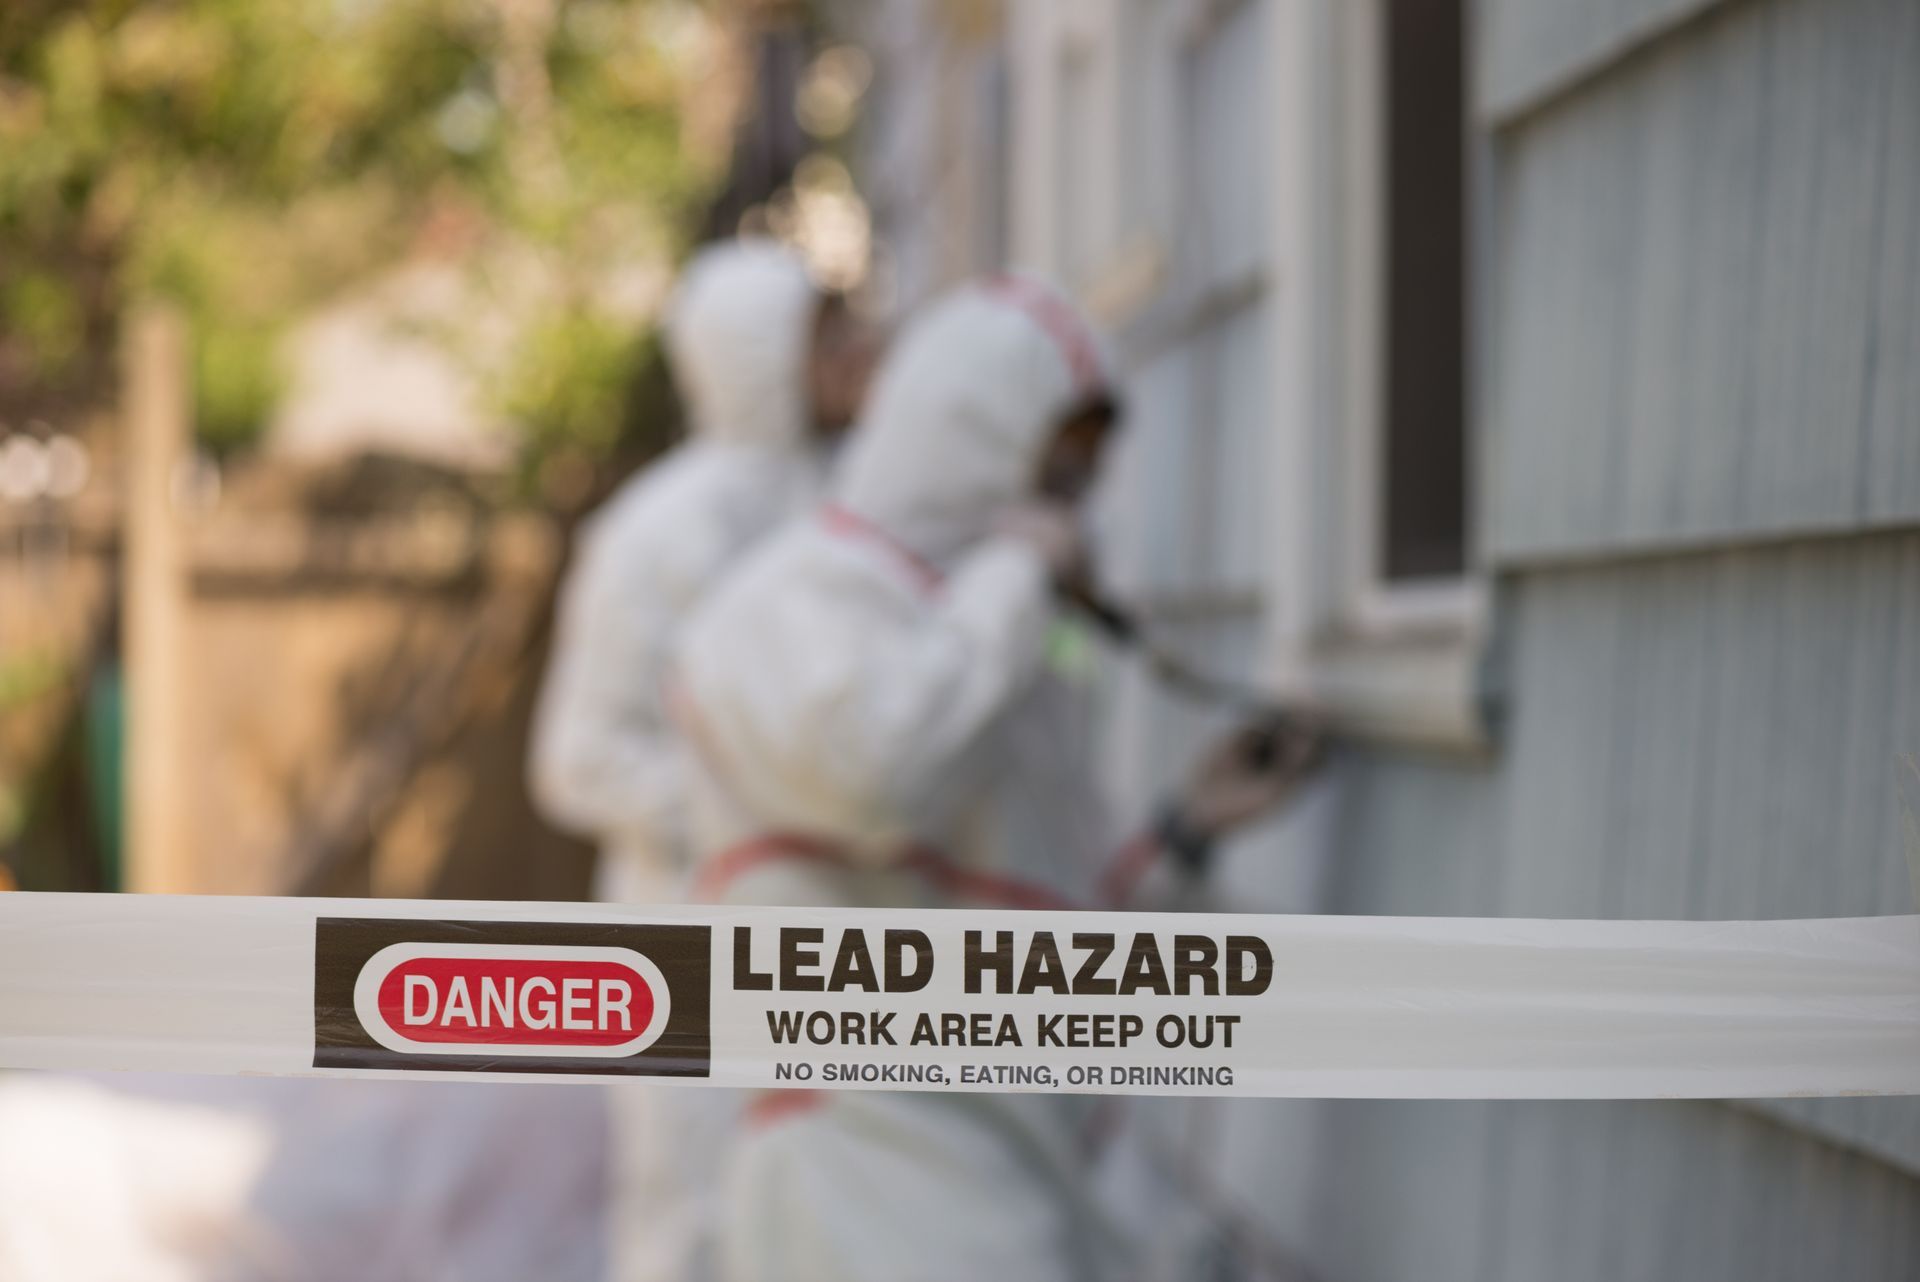 Two men in protective suits are painting a house with a lead hazard tape.